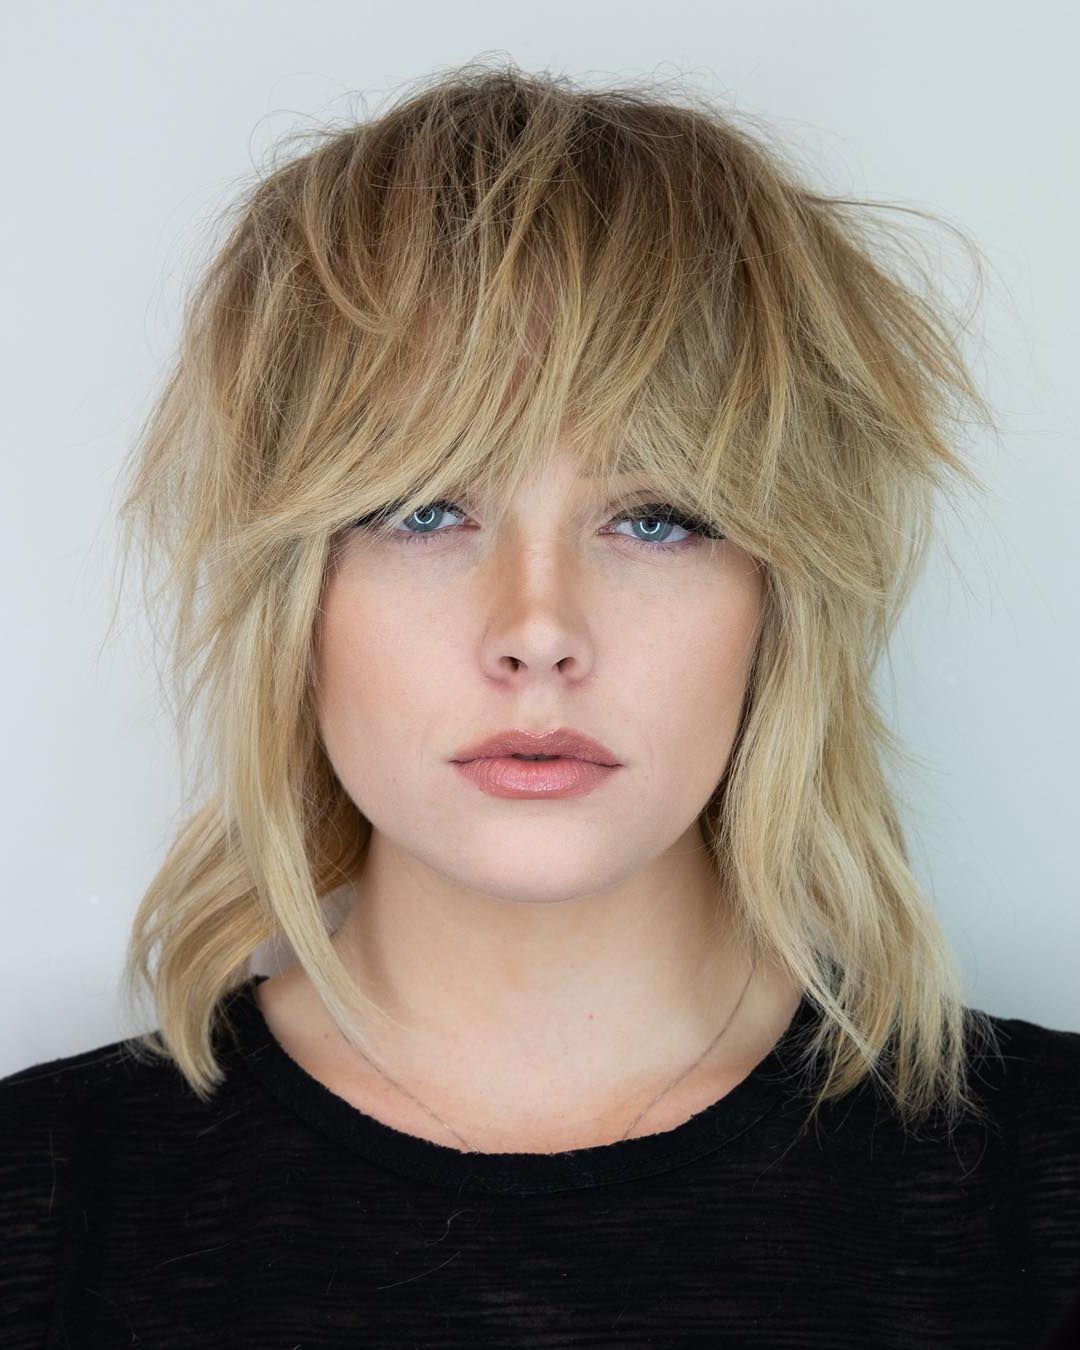 40 Modern Shag Haircuts For Women To Inspire Your Next Haircut In Widely Used Choppy Shag Hairstyles With Short Feathered Bangs (View 18 of 20)